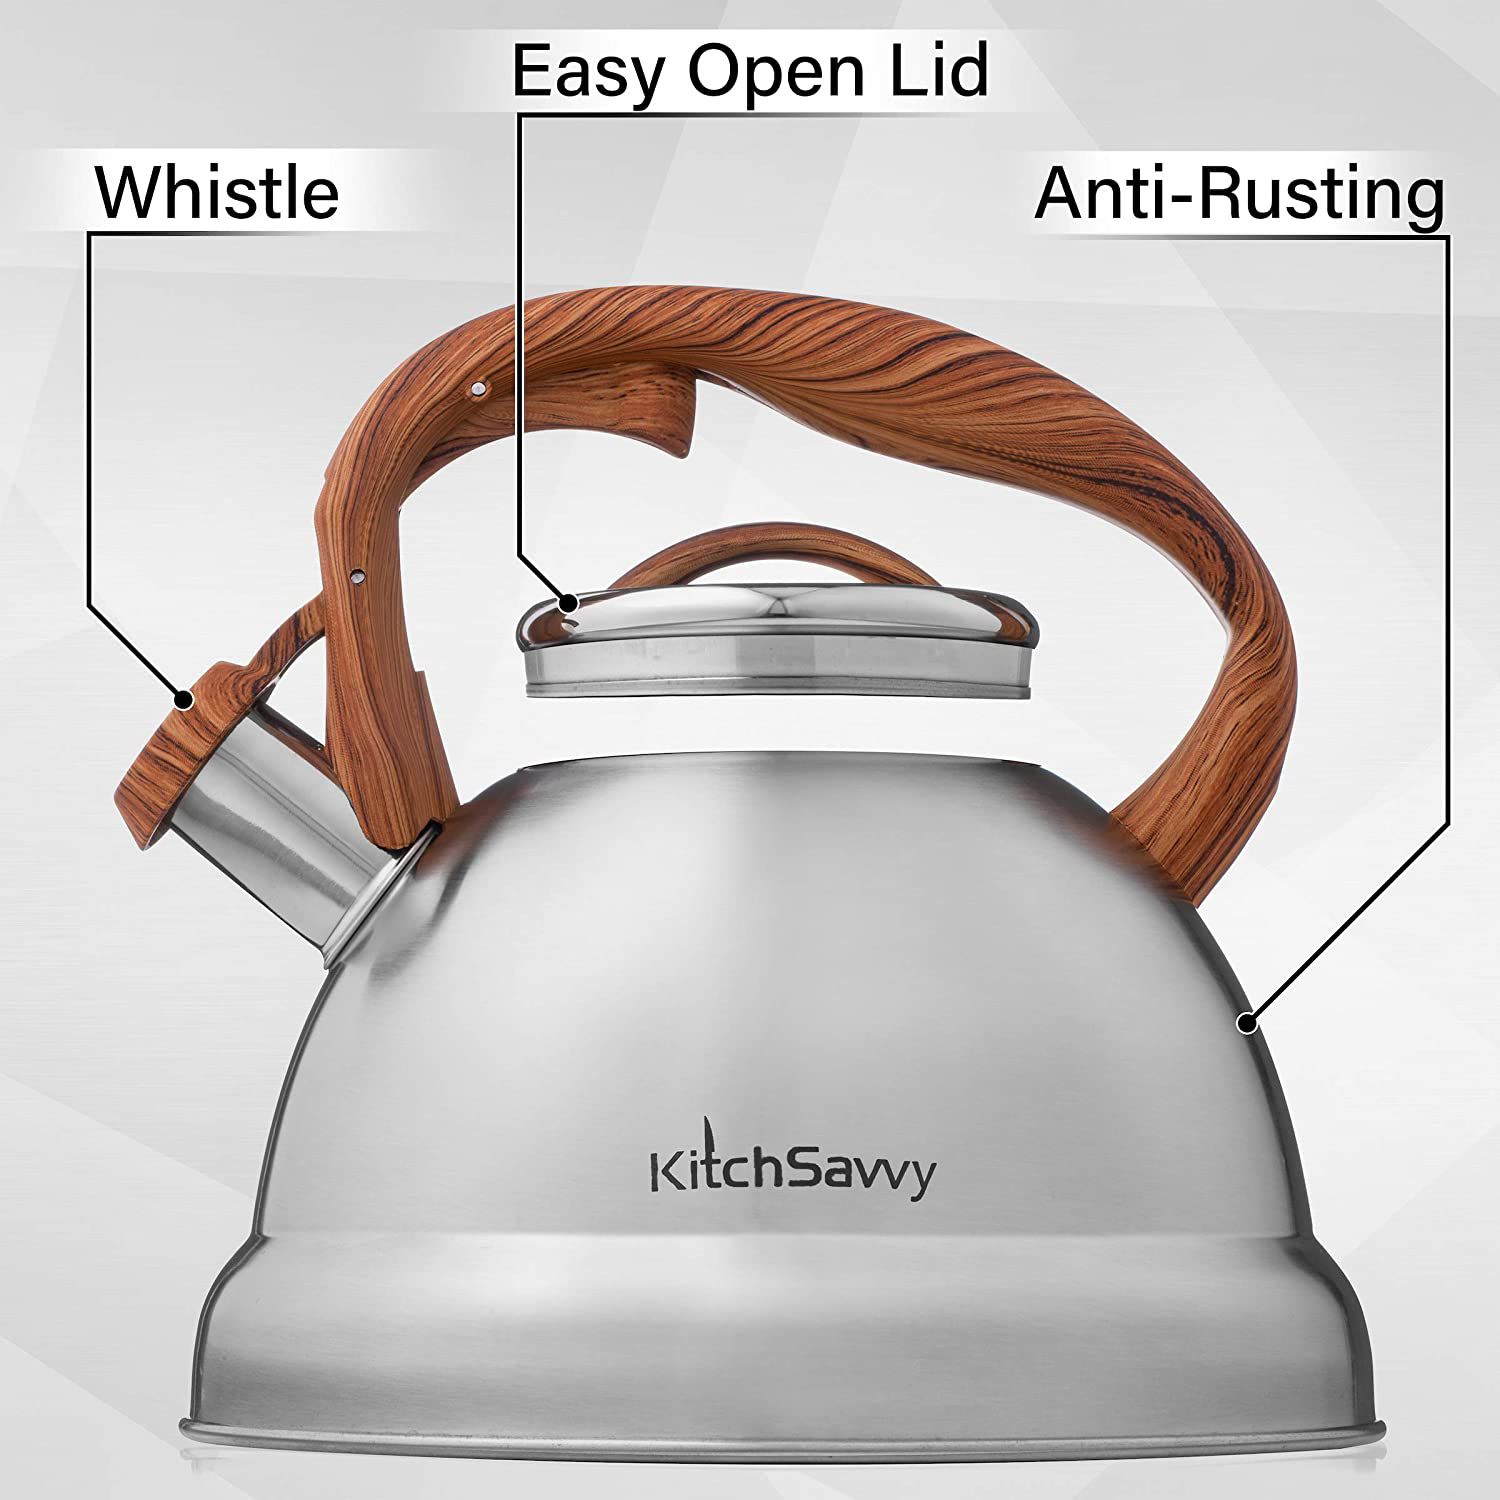 Tea Kettle For Stove Top – Stainless Steel Tea Kettle Stovetop - Whistling Tea Kettle With Stay Cool Handle